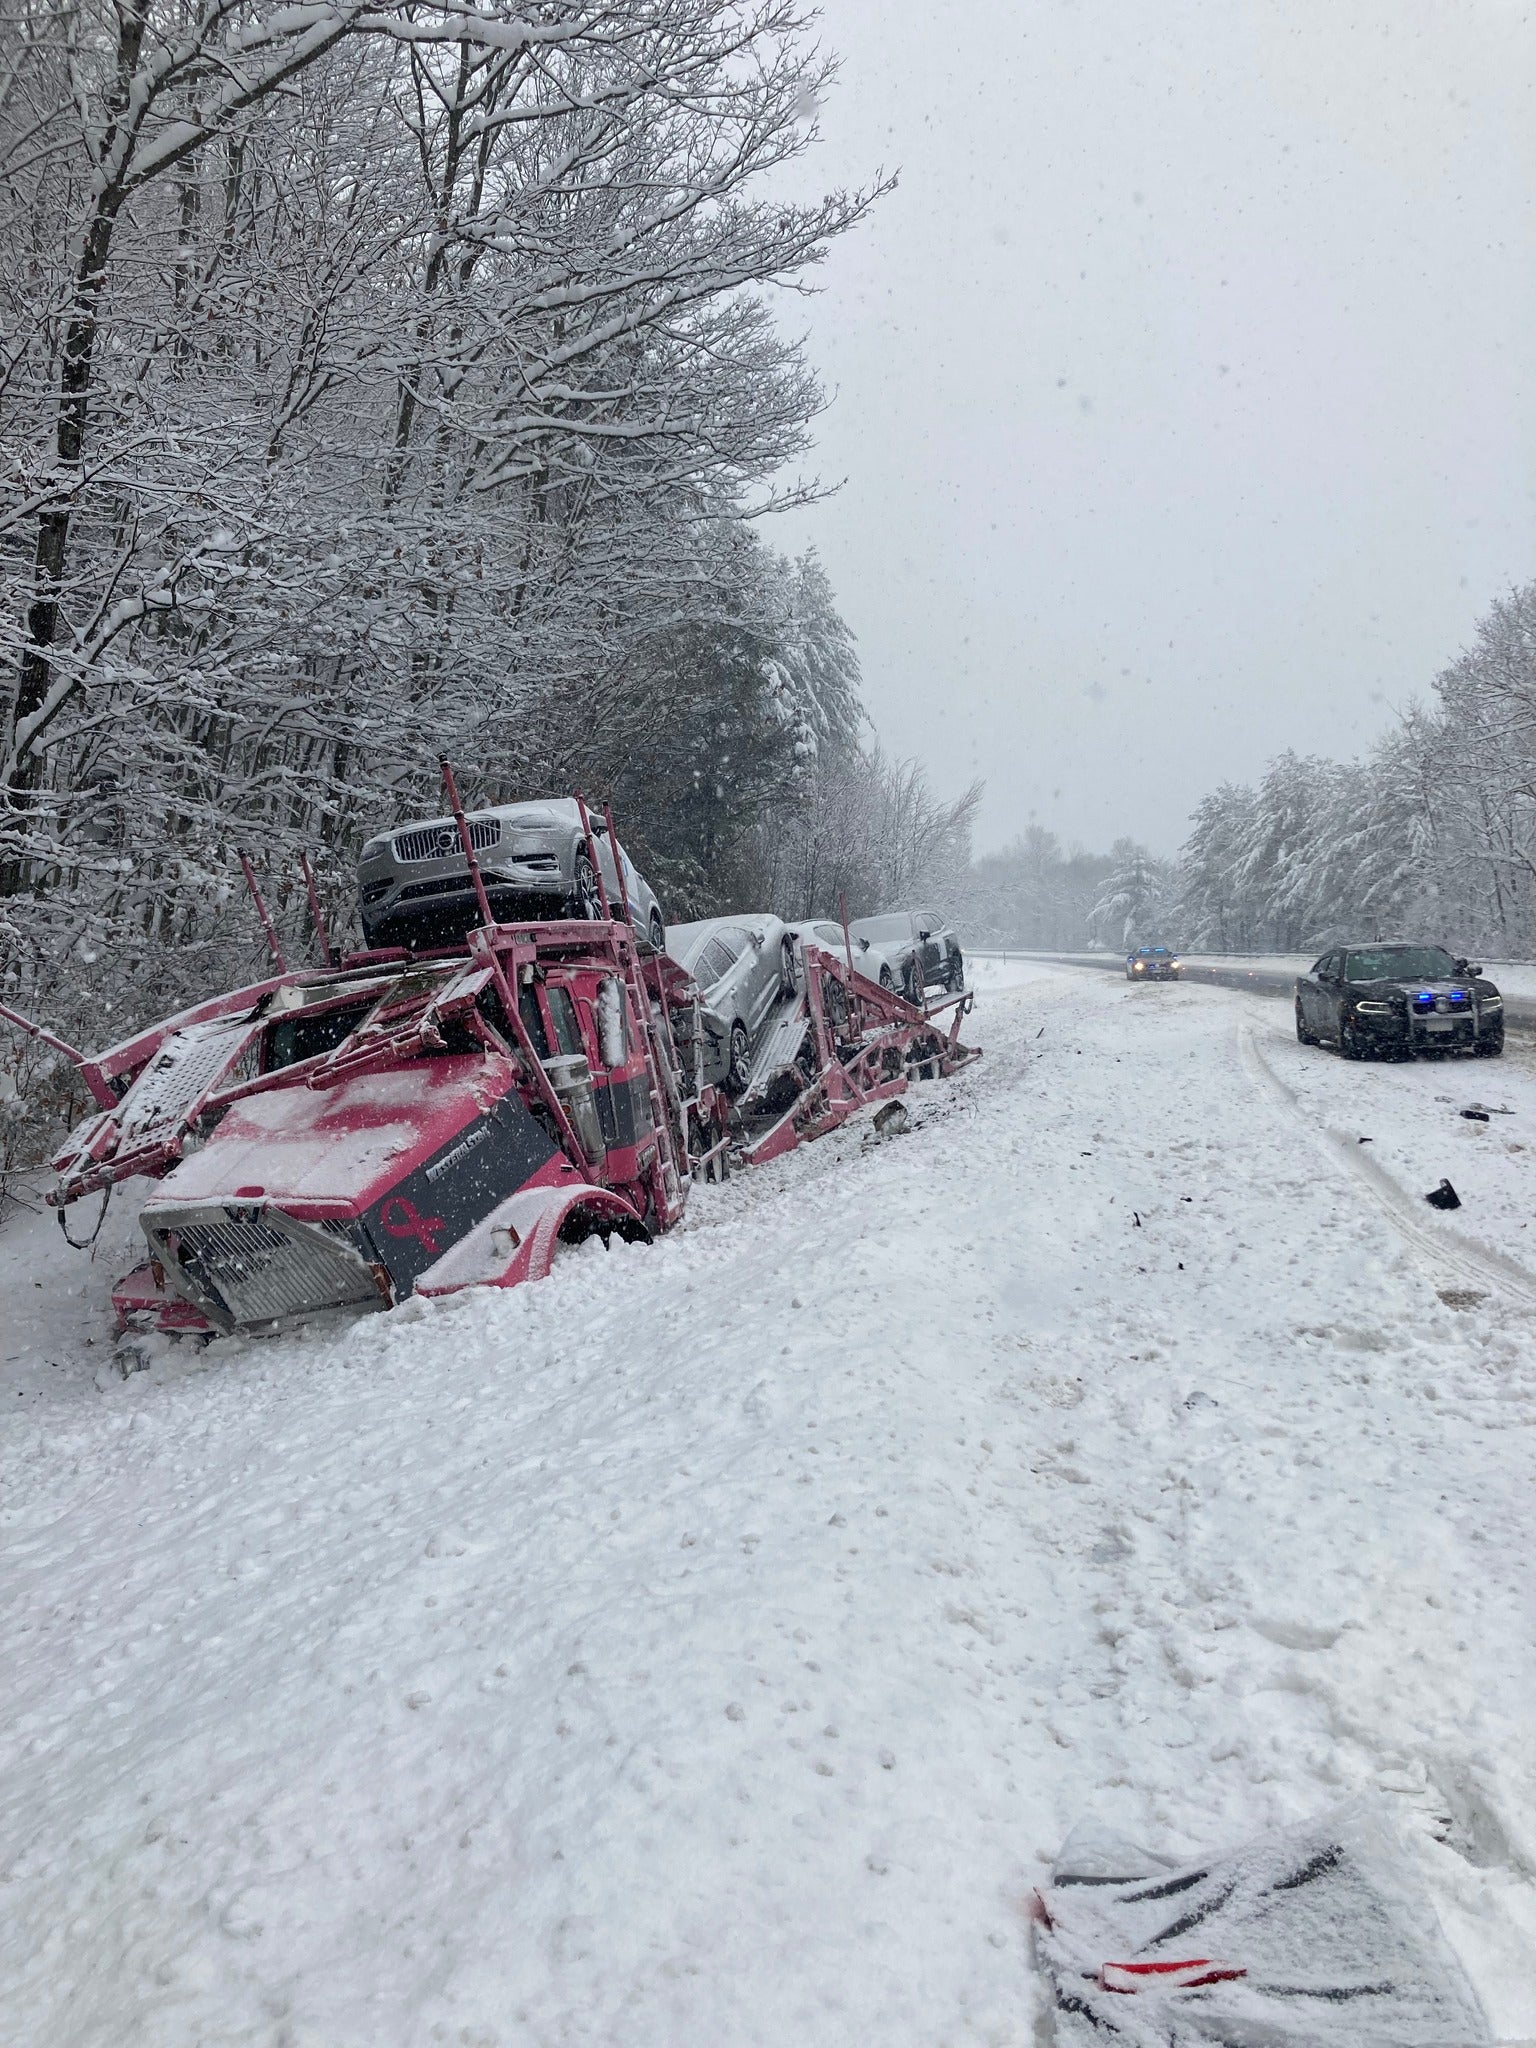 A commercial car carrier crashed on I-89 south in Warner, New Hampshire, on Monday morning.